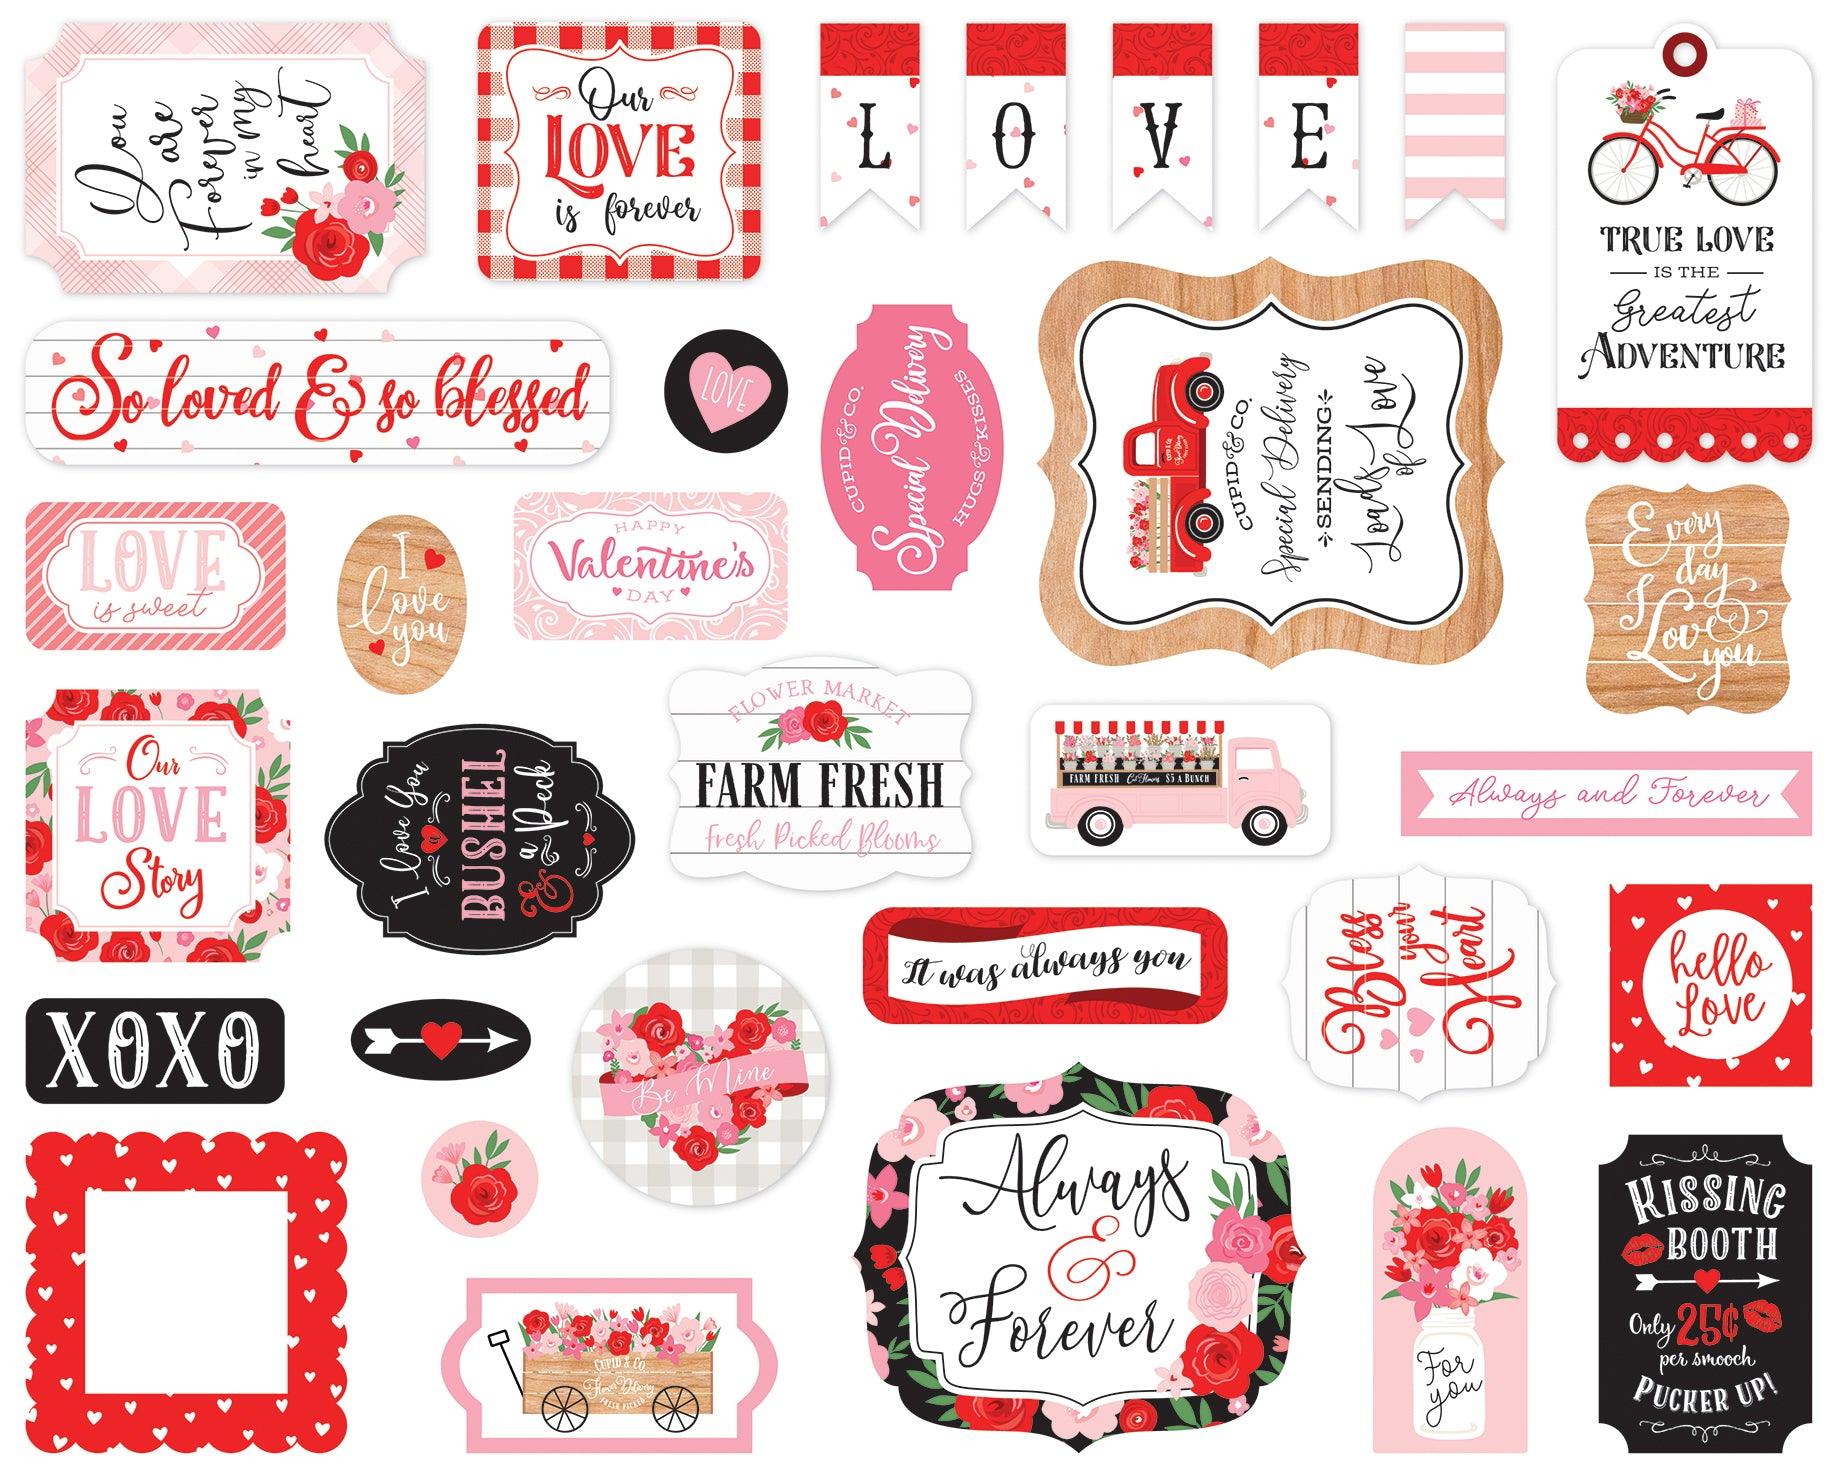 Echo Park Paper Co. 12x12 Scrapbook Paper - Cupid & Co. Collection - I –  Everything Mixed Media